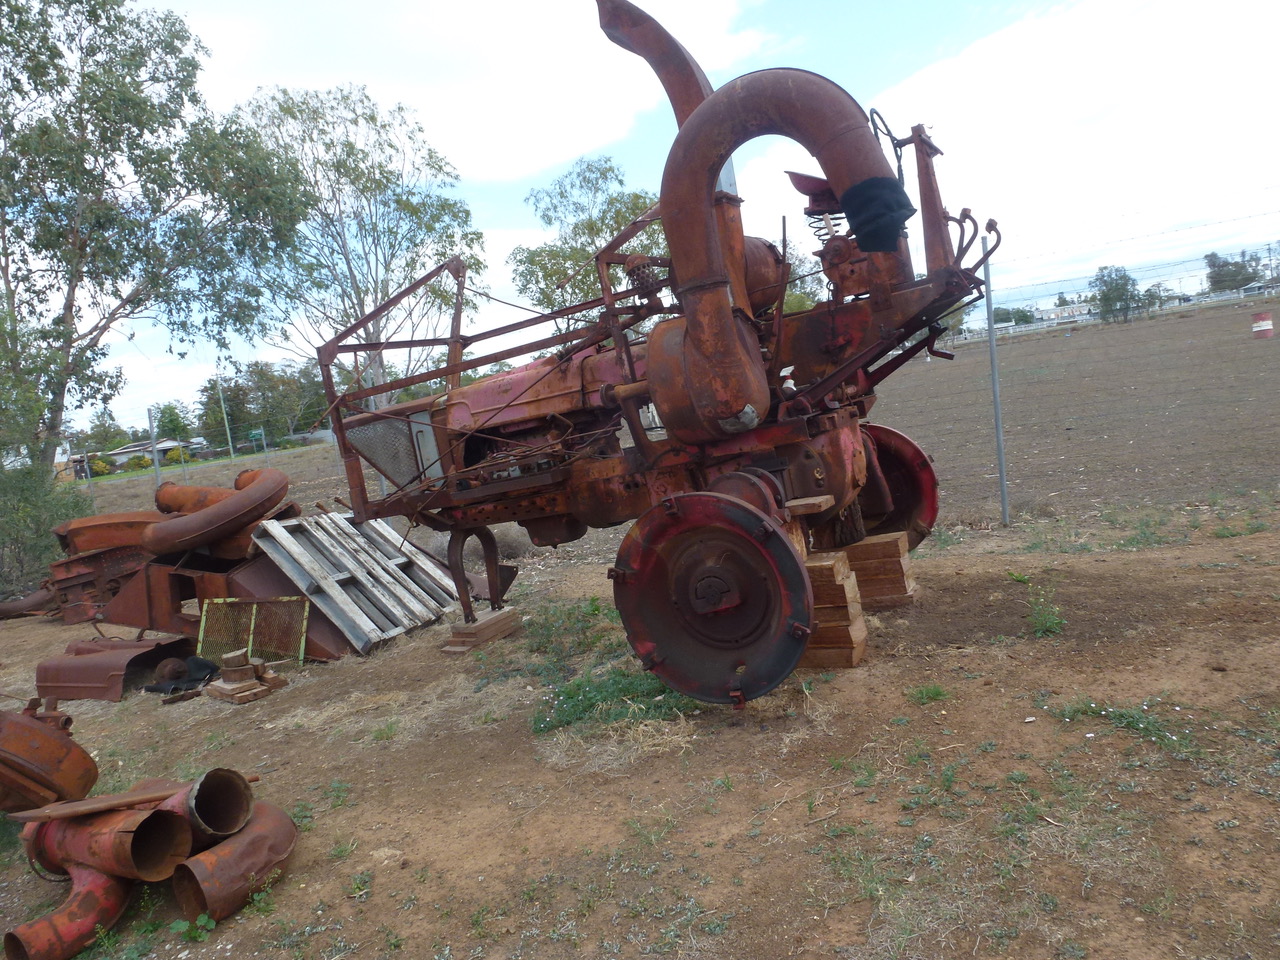 What a transformation: as the photos show, Ronan Revell and an army of workers have transformed the rusty, old cotton picker into what is now a magnificent, bright red and fully restored machine. 